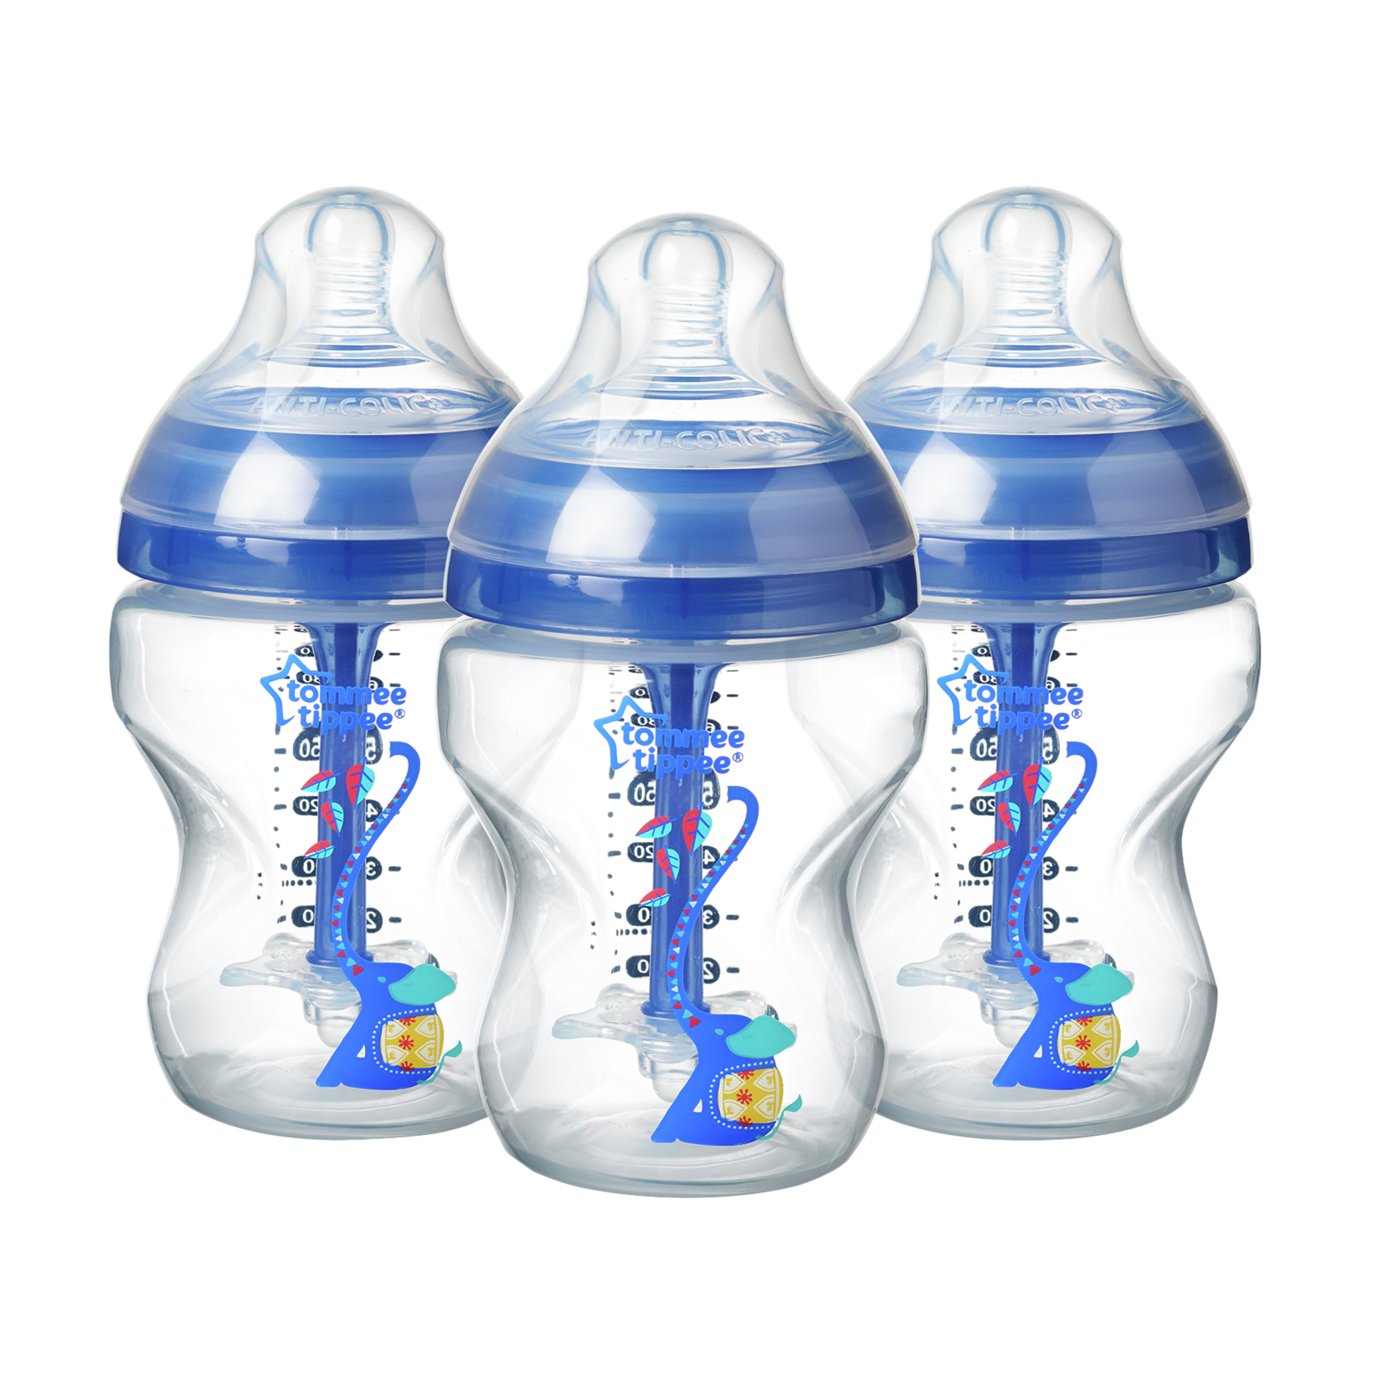 Tommee Tippee Advanced Anti-Colic Blue Bottles Review